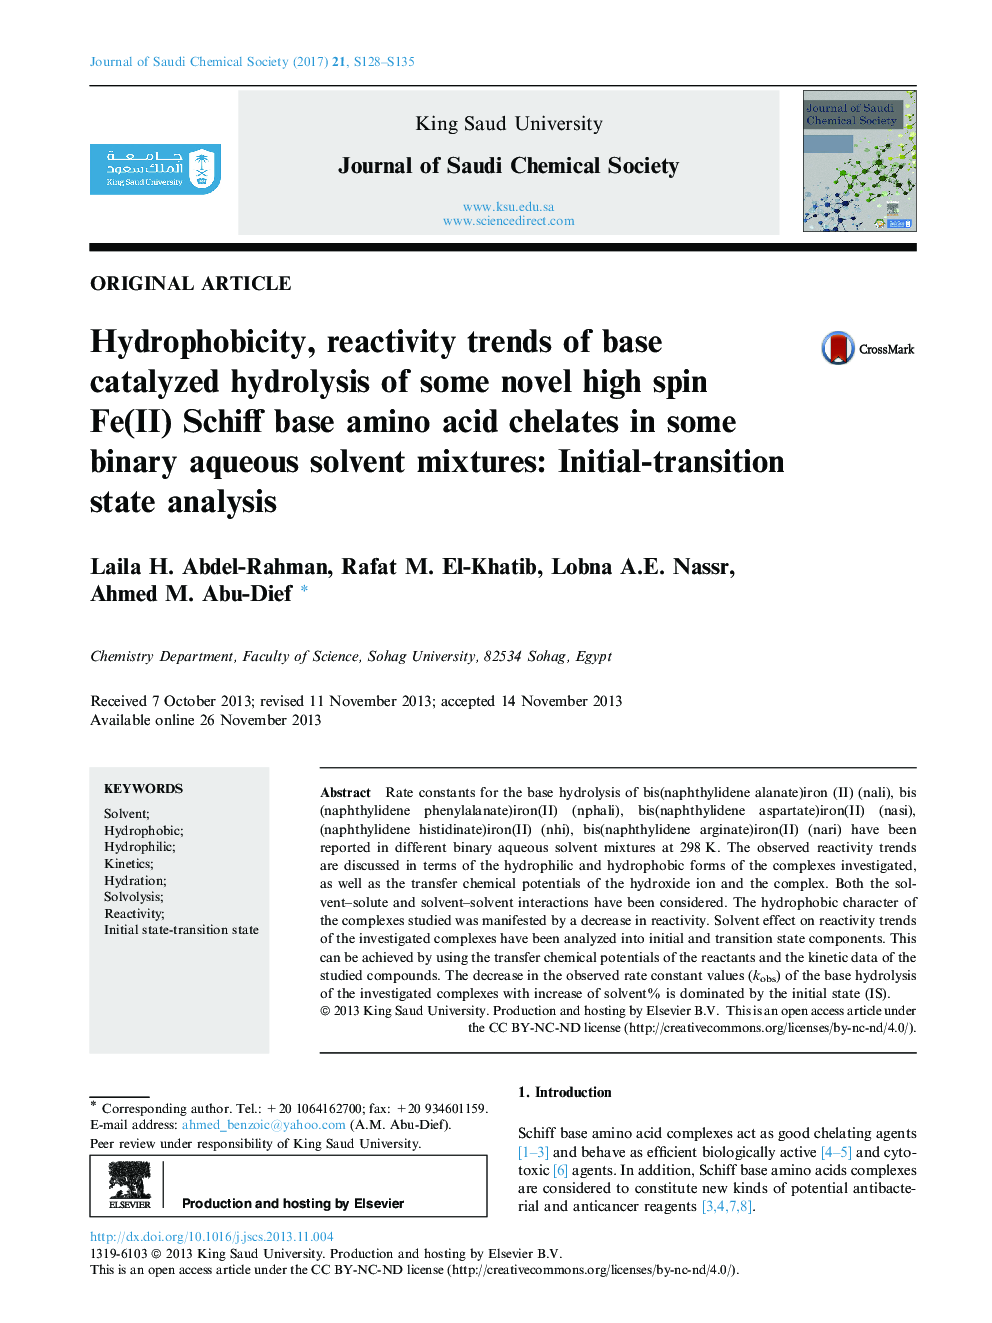 Hydrophobicity, reactivity trends of base catalyzed hydrolysis of some novel high spin Fe(II) Schiff base amino acid chelates in some binary aqueous solvent mixtures: Initial-transition state analysis